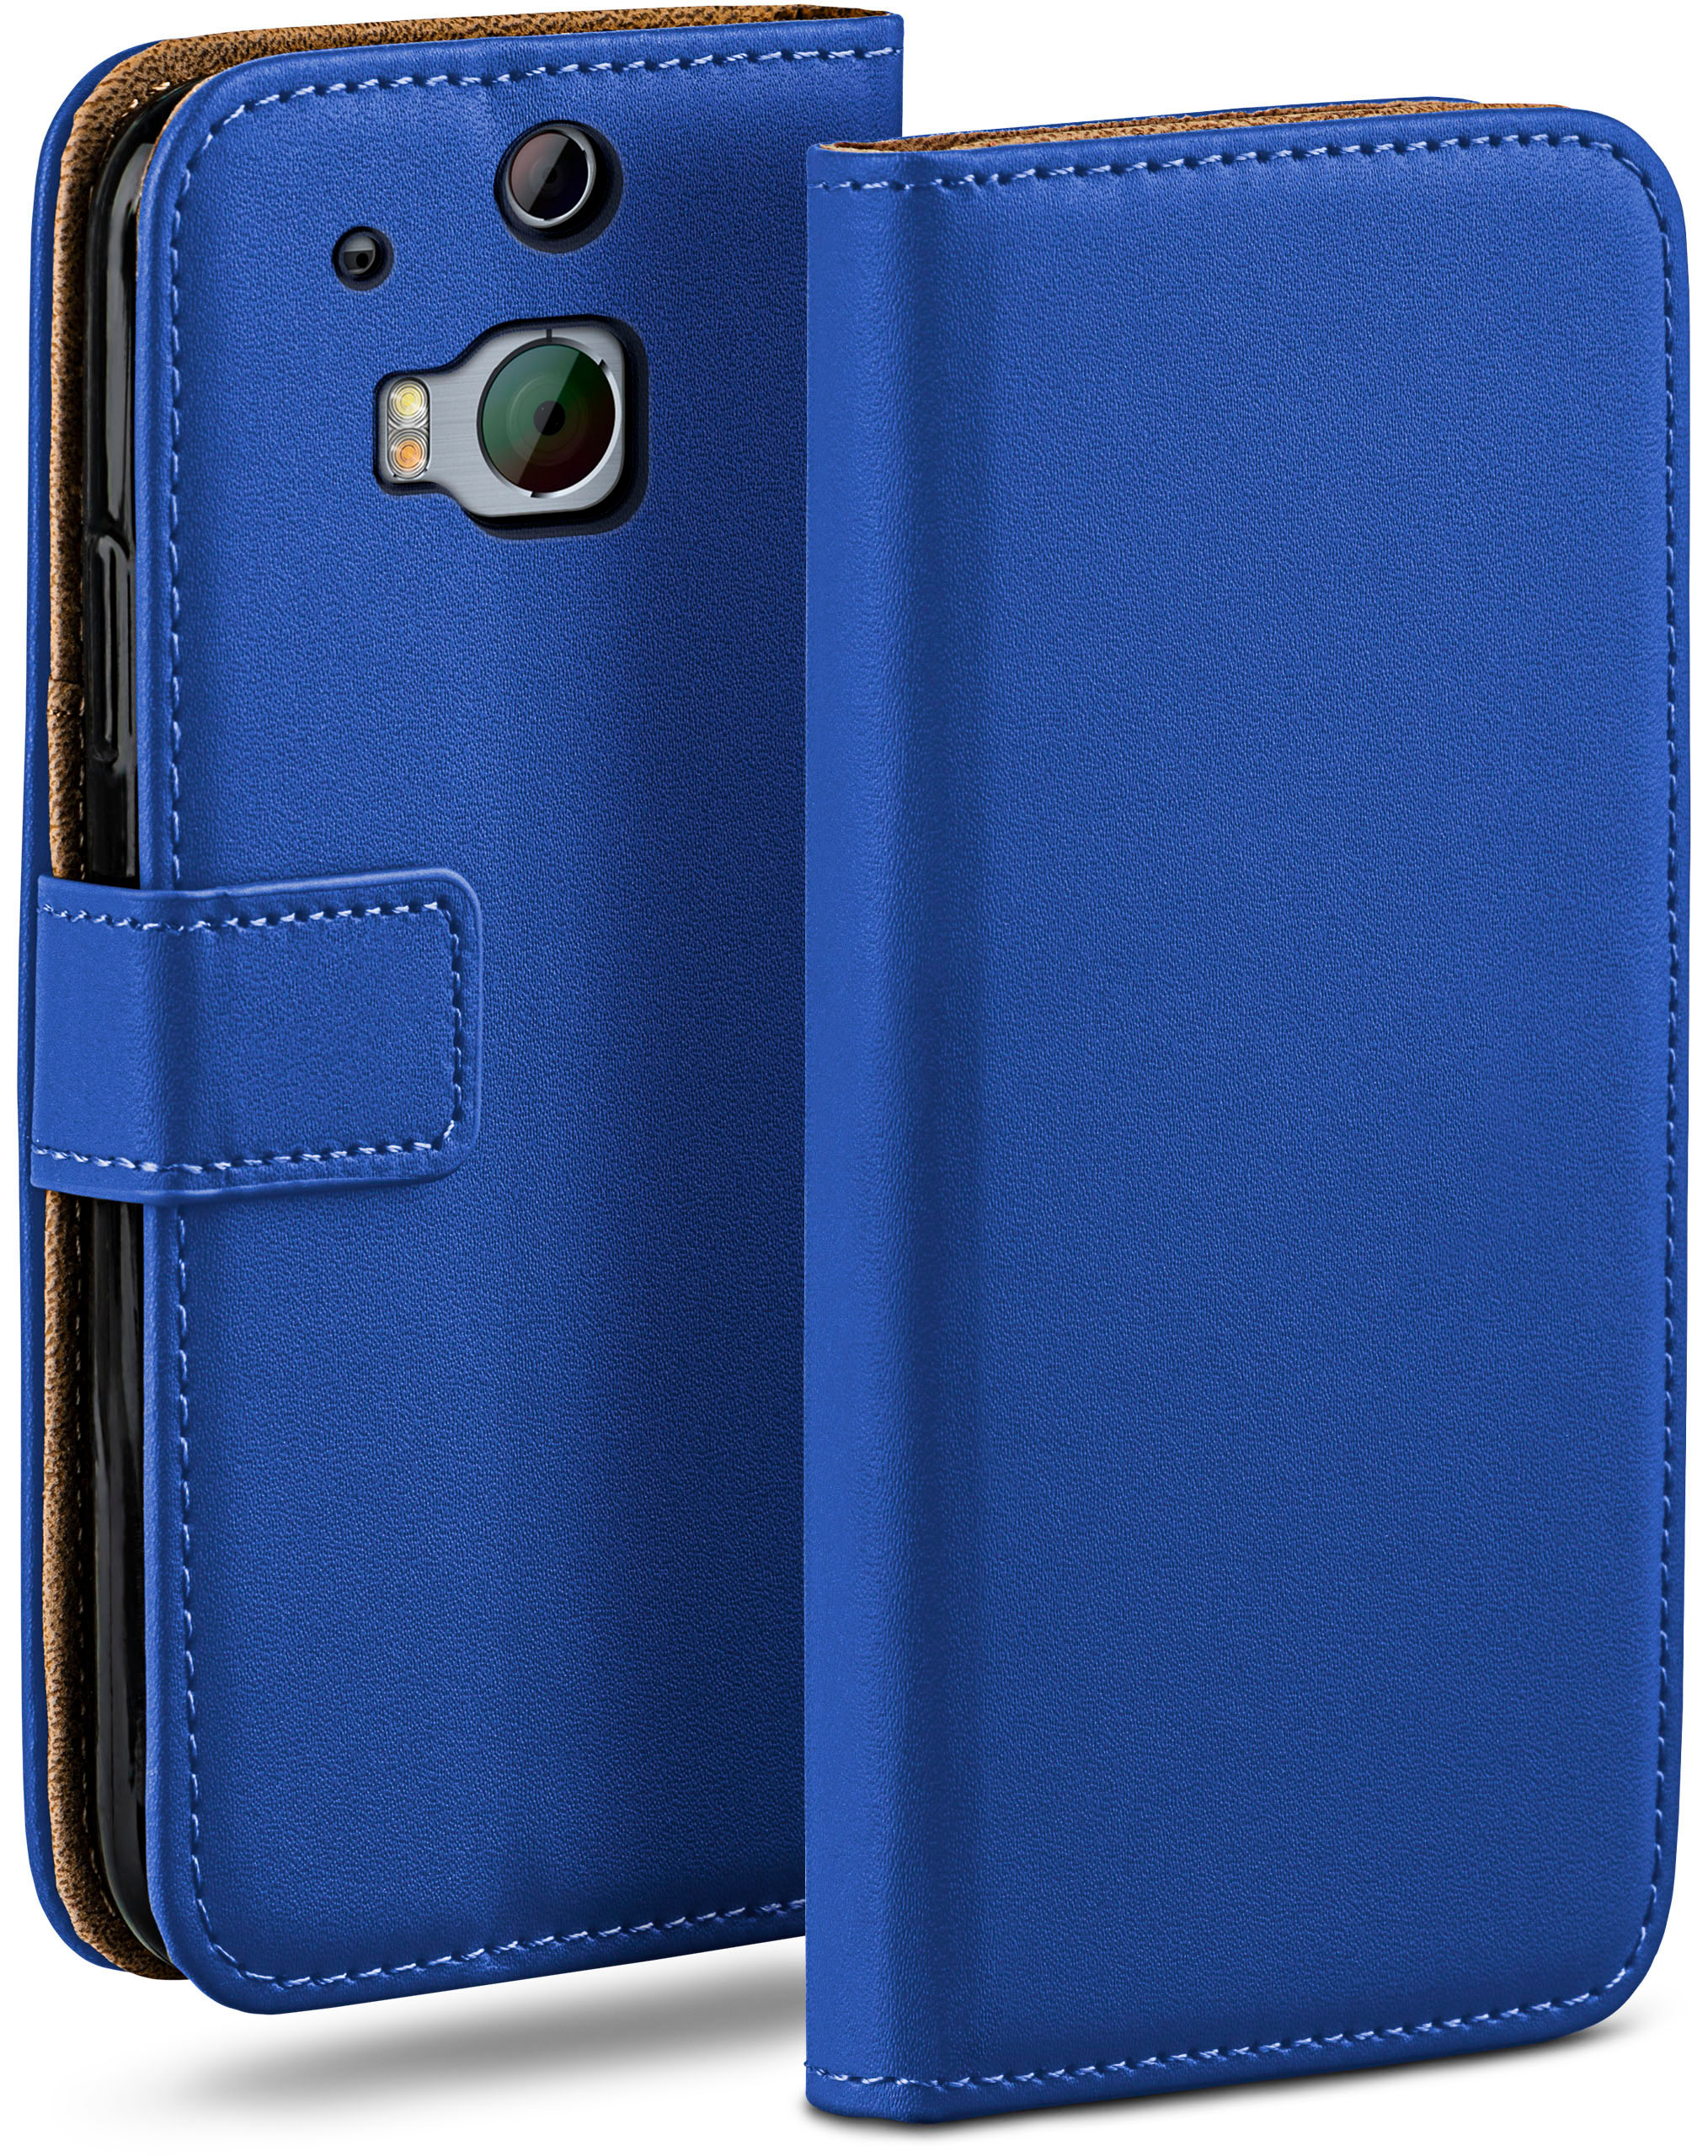 / One Book Royal-Blue MOEX Bookcover, M8 M8s, HTC, Case,